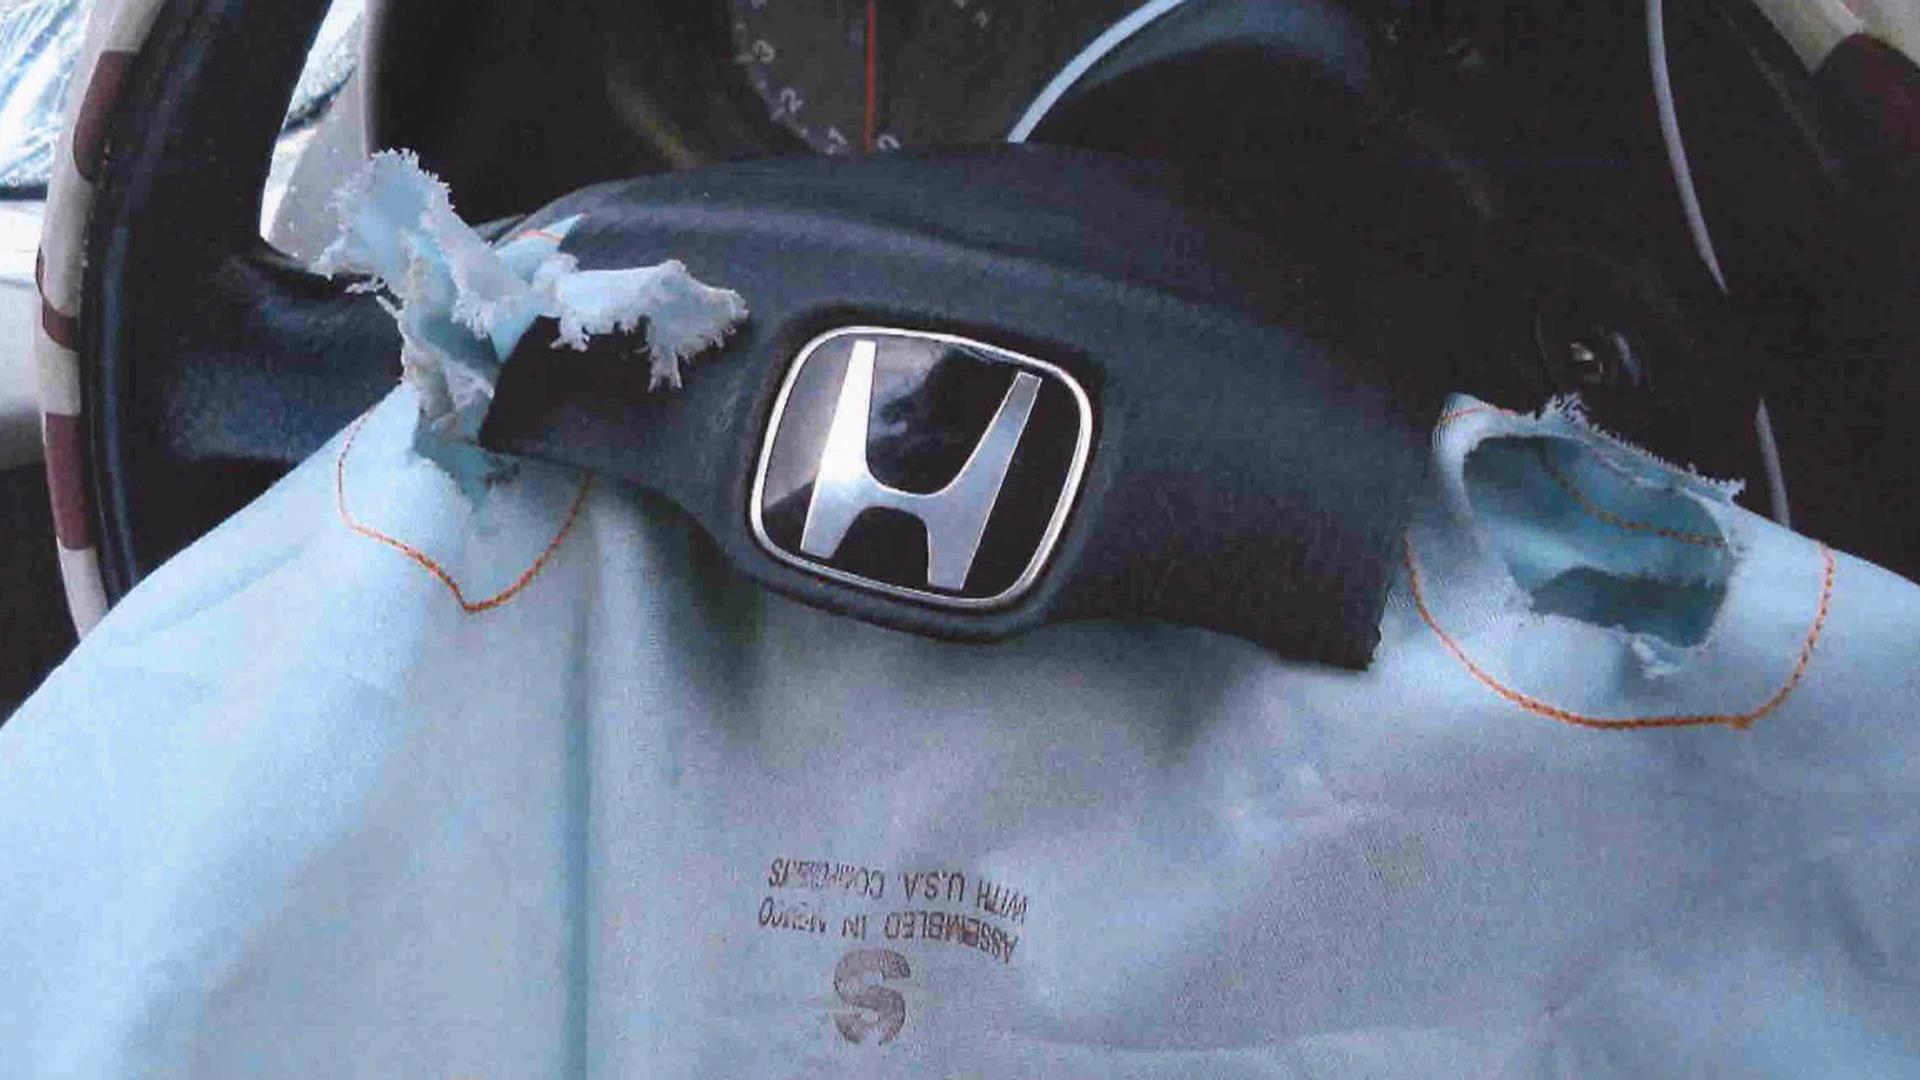 Takata Ordered to Recall Up to 40 Million More Airbags